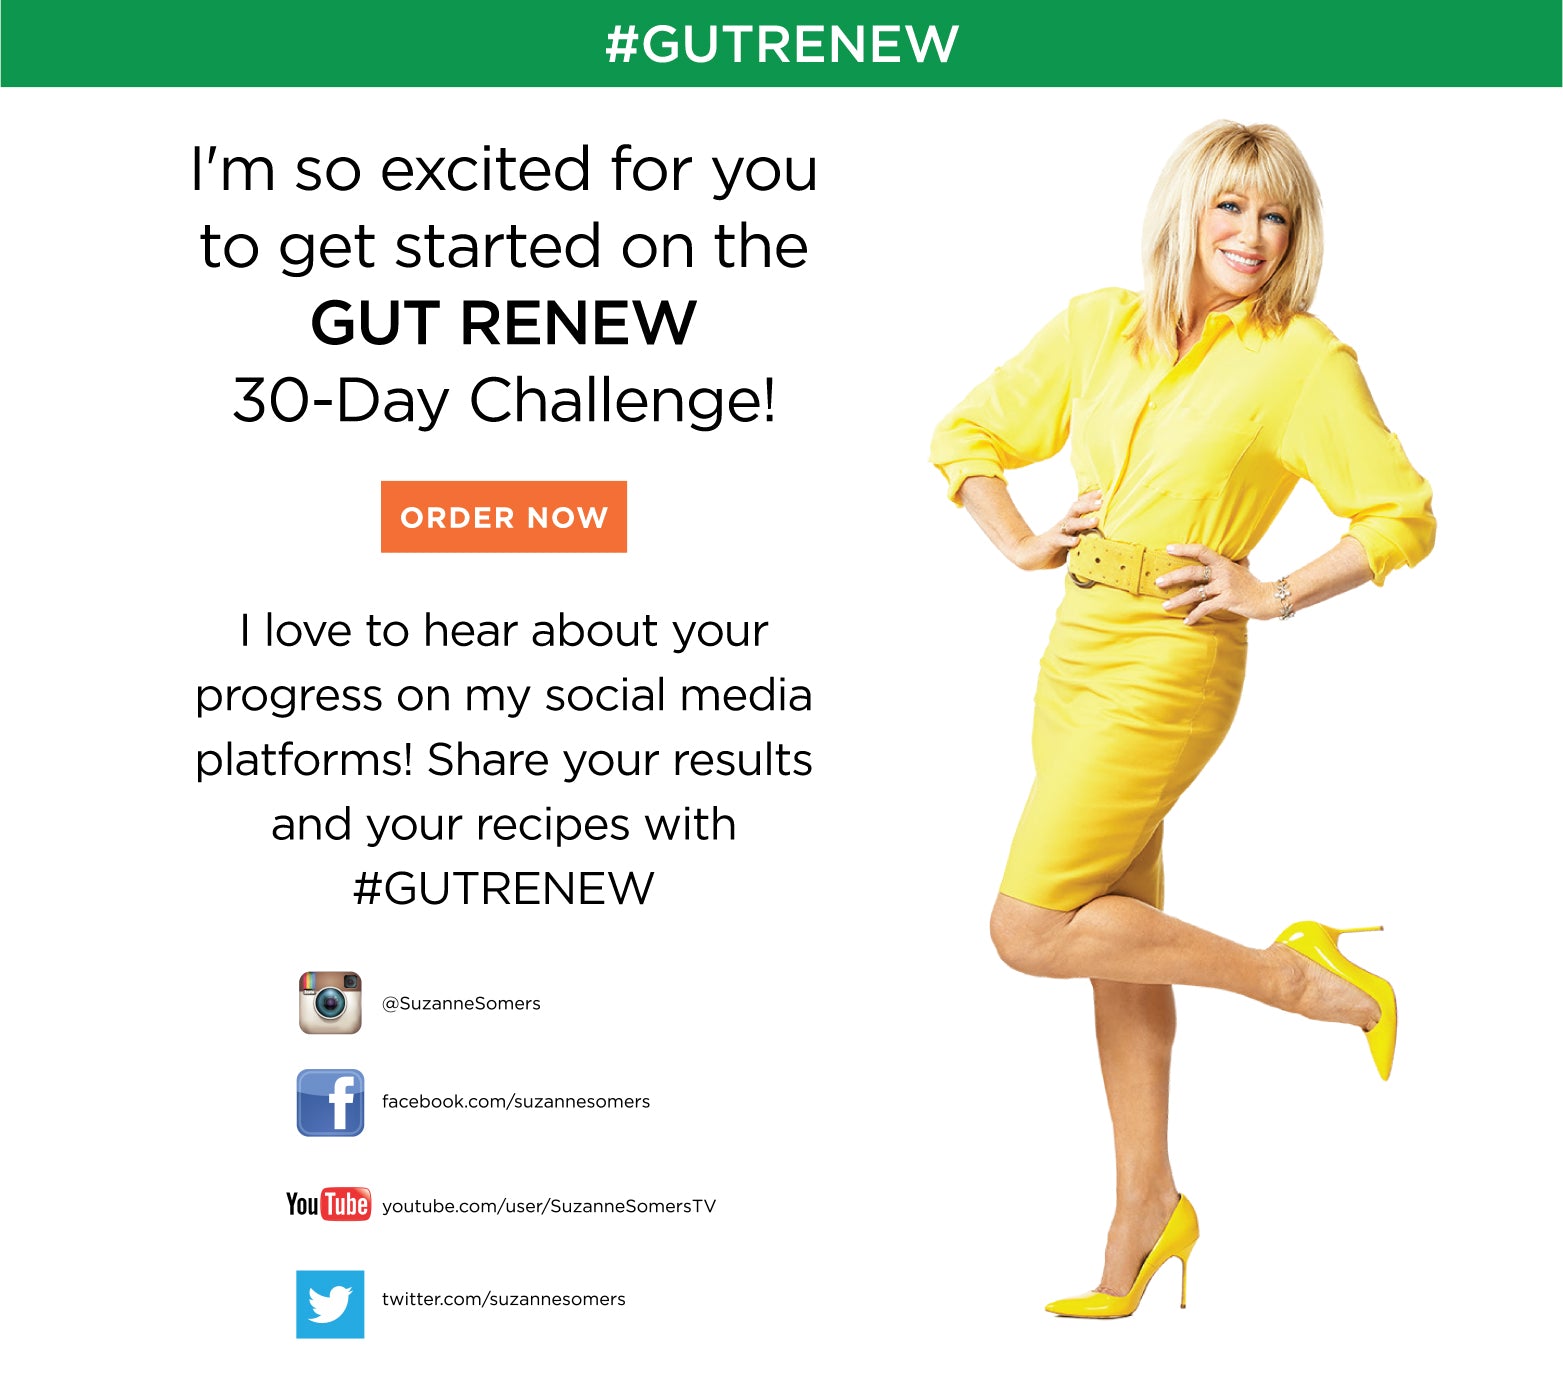 I'm so excited for you to get started on the GUT RENEW 30-Day Challenge. ORDER NOW. I love to hear about your progresson my social media platforms! Share your results and your recipes with #GUTRENEW